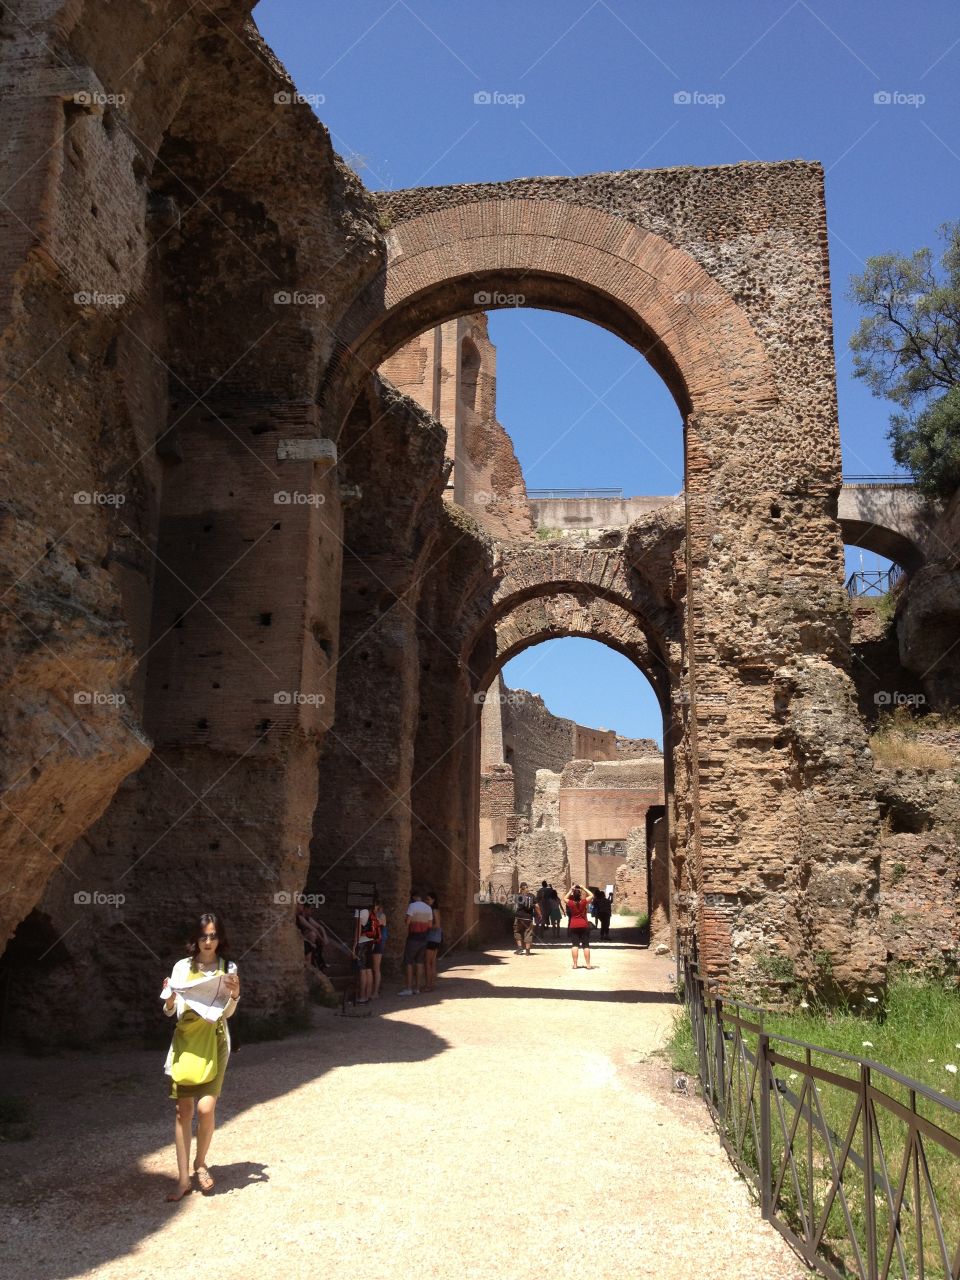 Arches of the ruins of the old Roman palace in Rome, italy